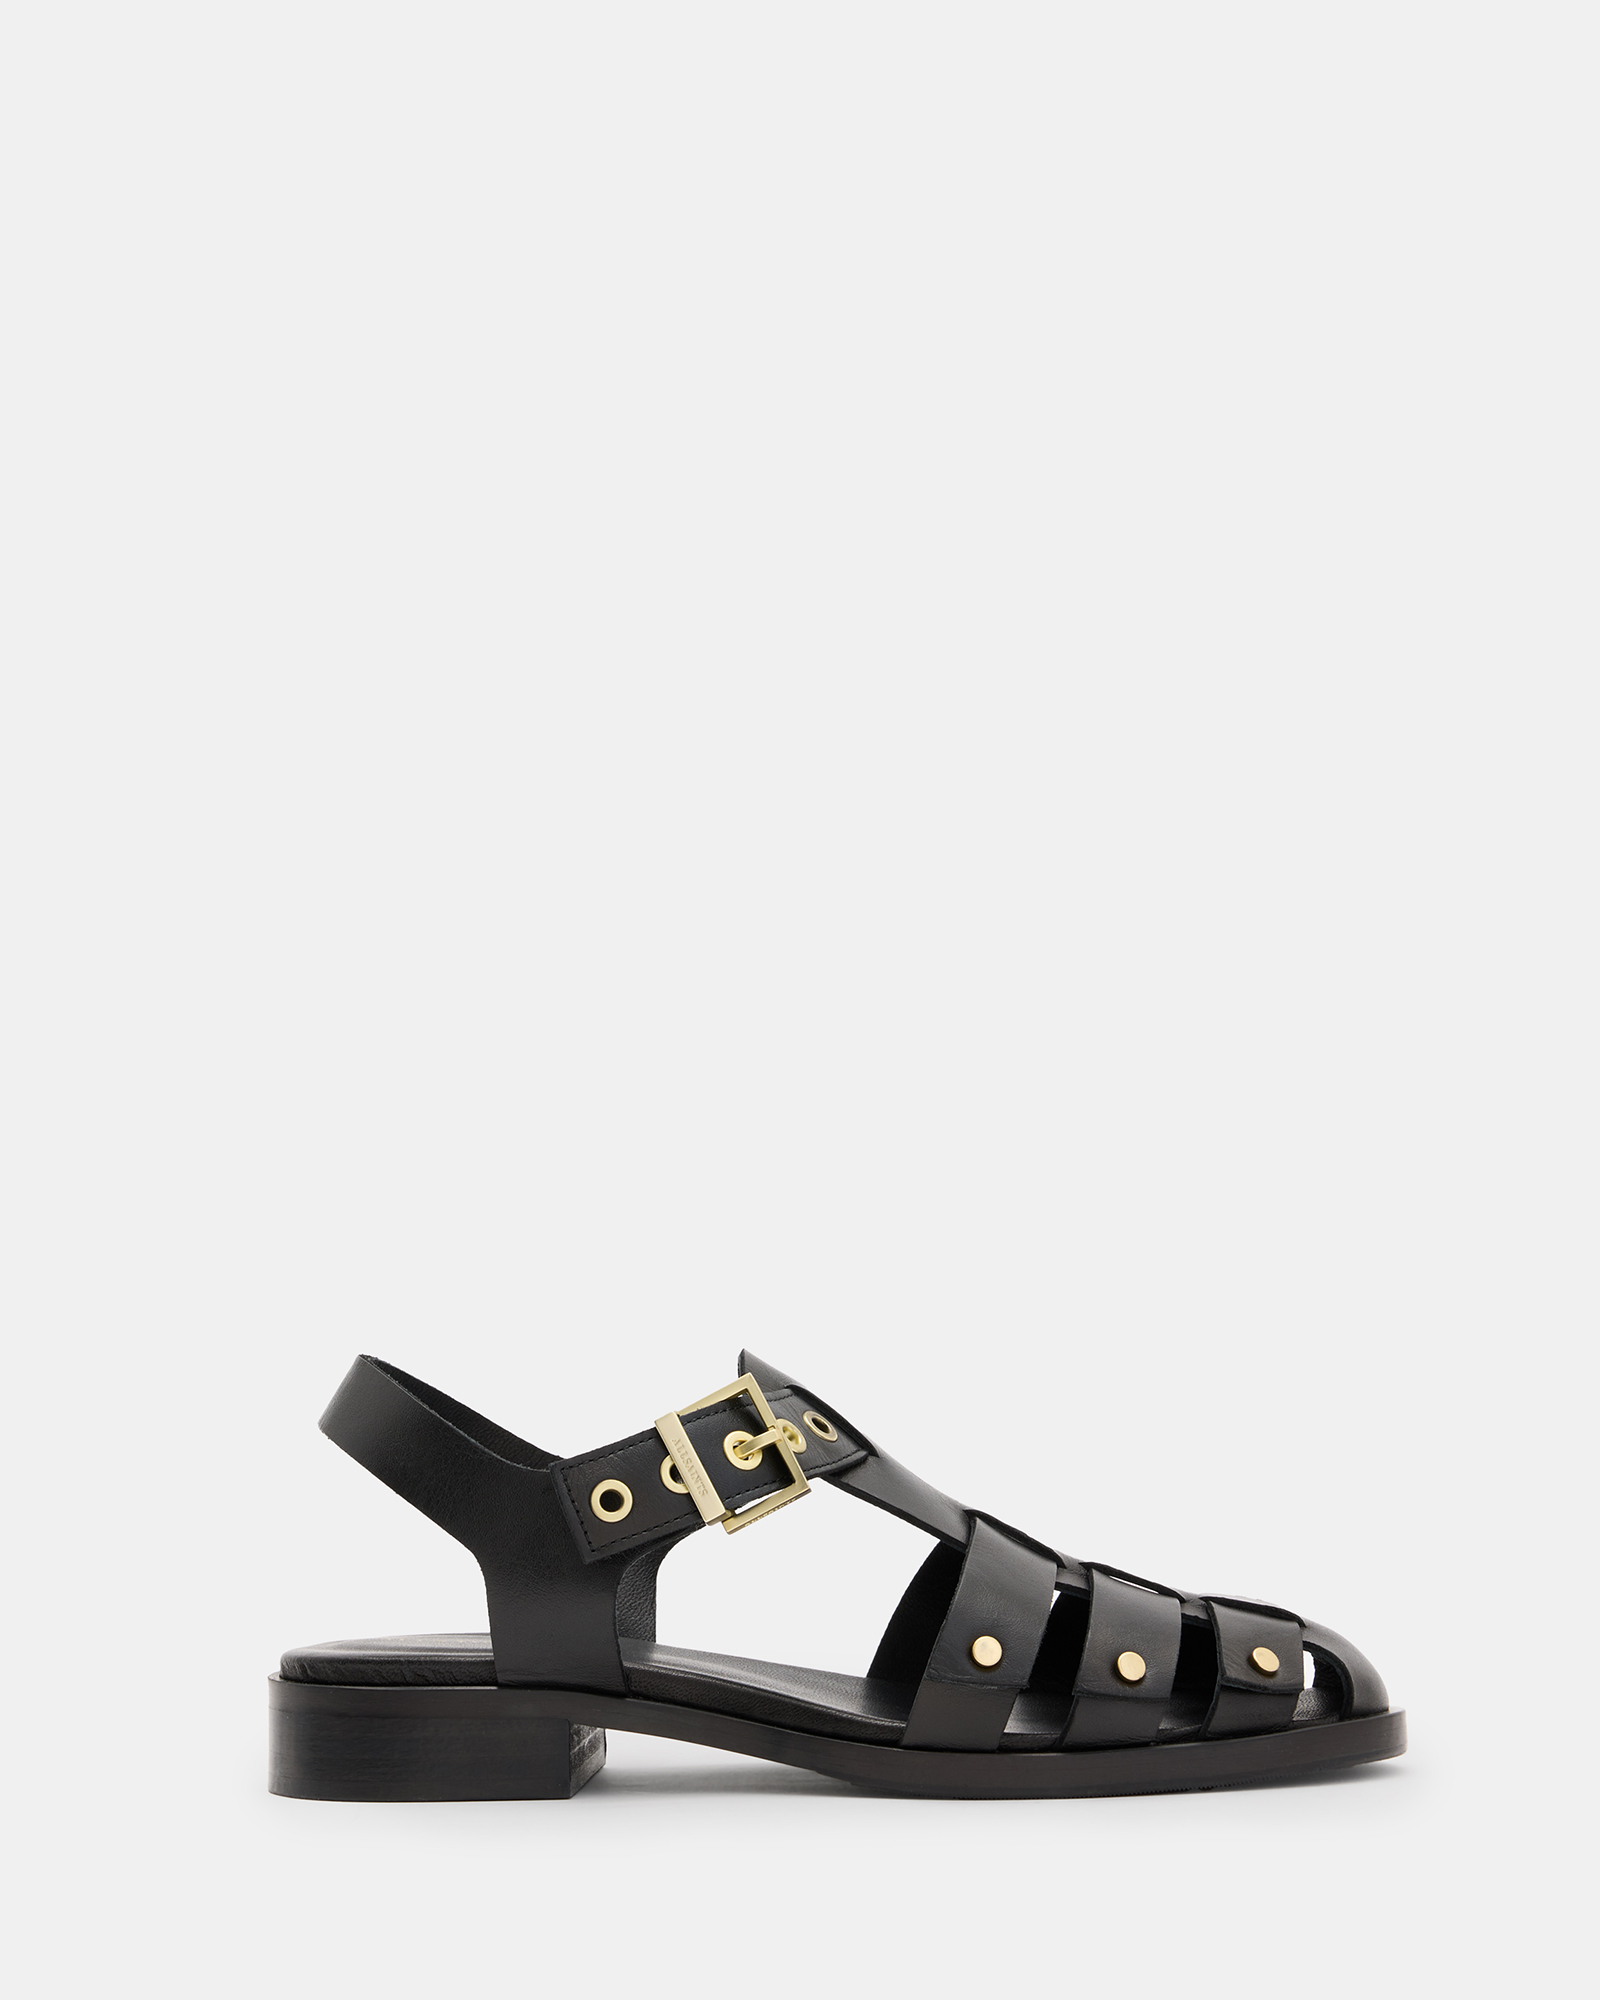 AllSaints Nelly Studded Leather Sandals,, Black